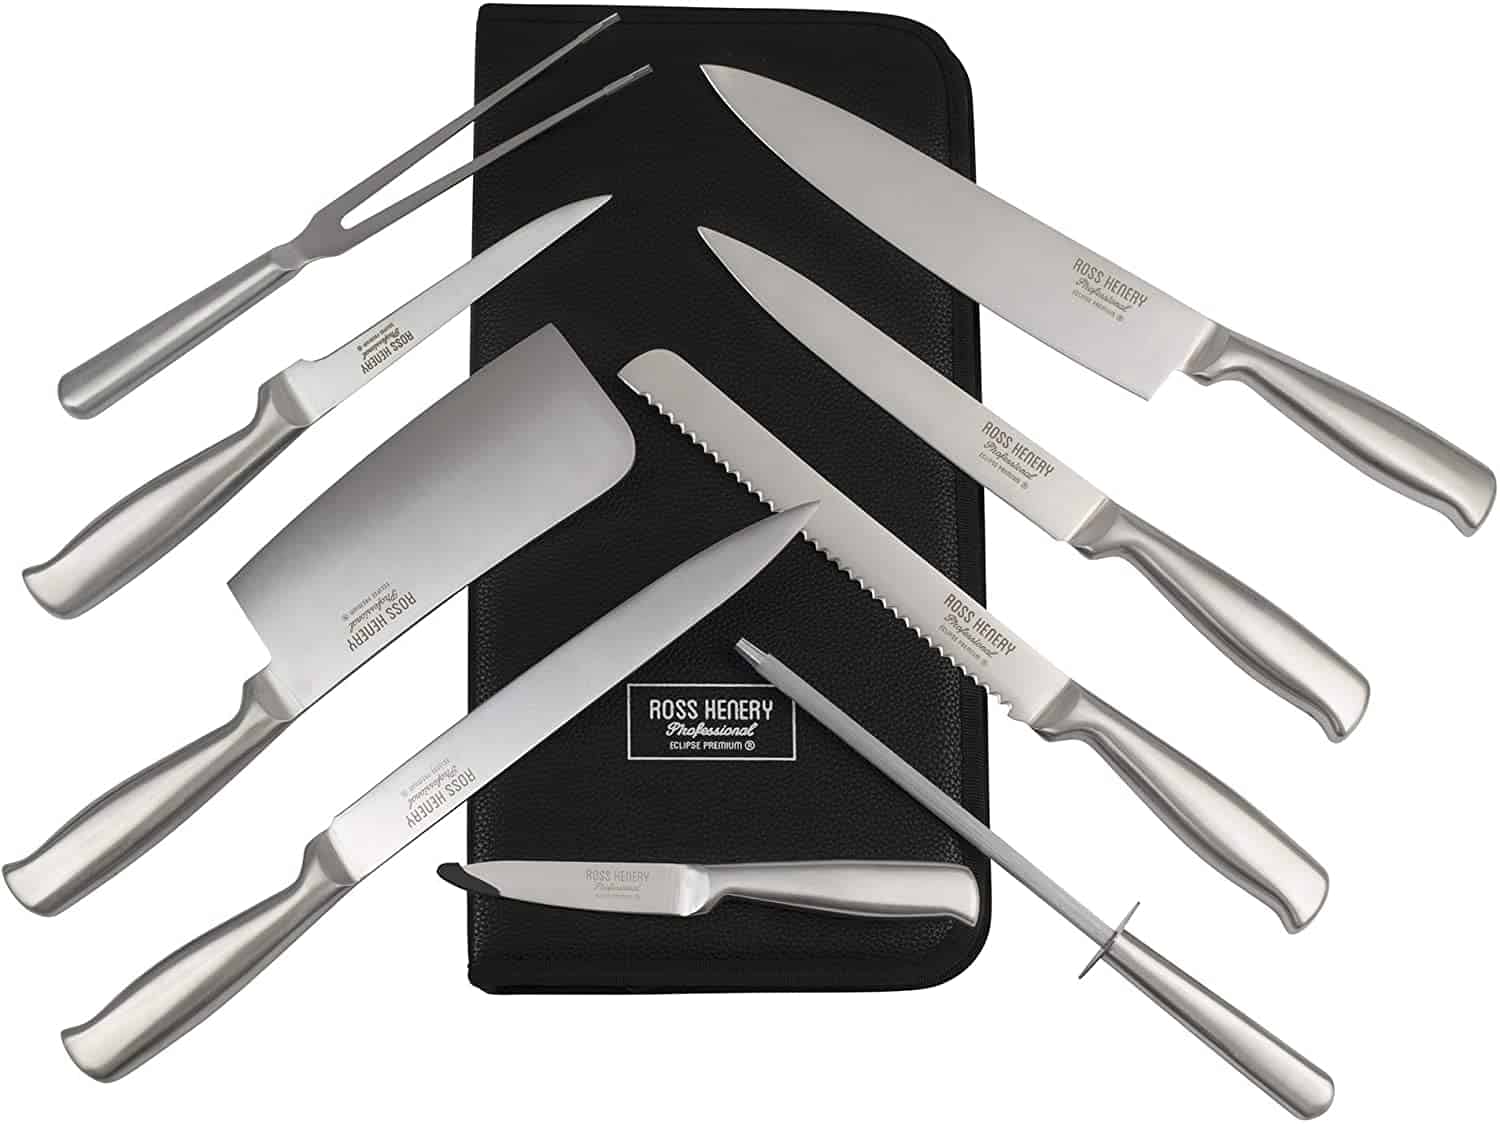 Best complete knife set & best for pitmasters: Ross Henery Eclipse Premium